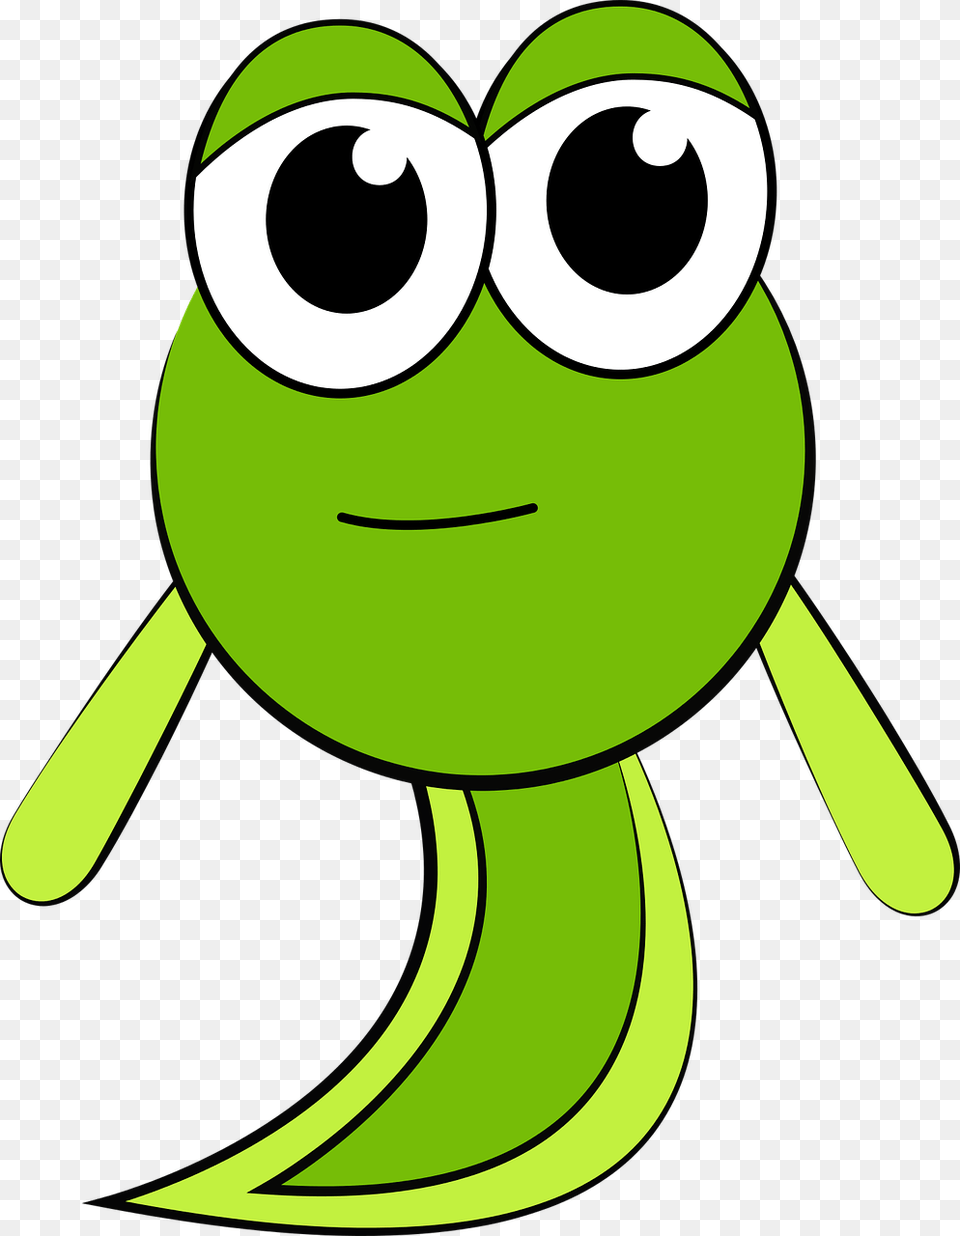 Tadpolecharacter Animator Stockxchng, Green, Face, Head, Person Png Image